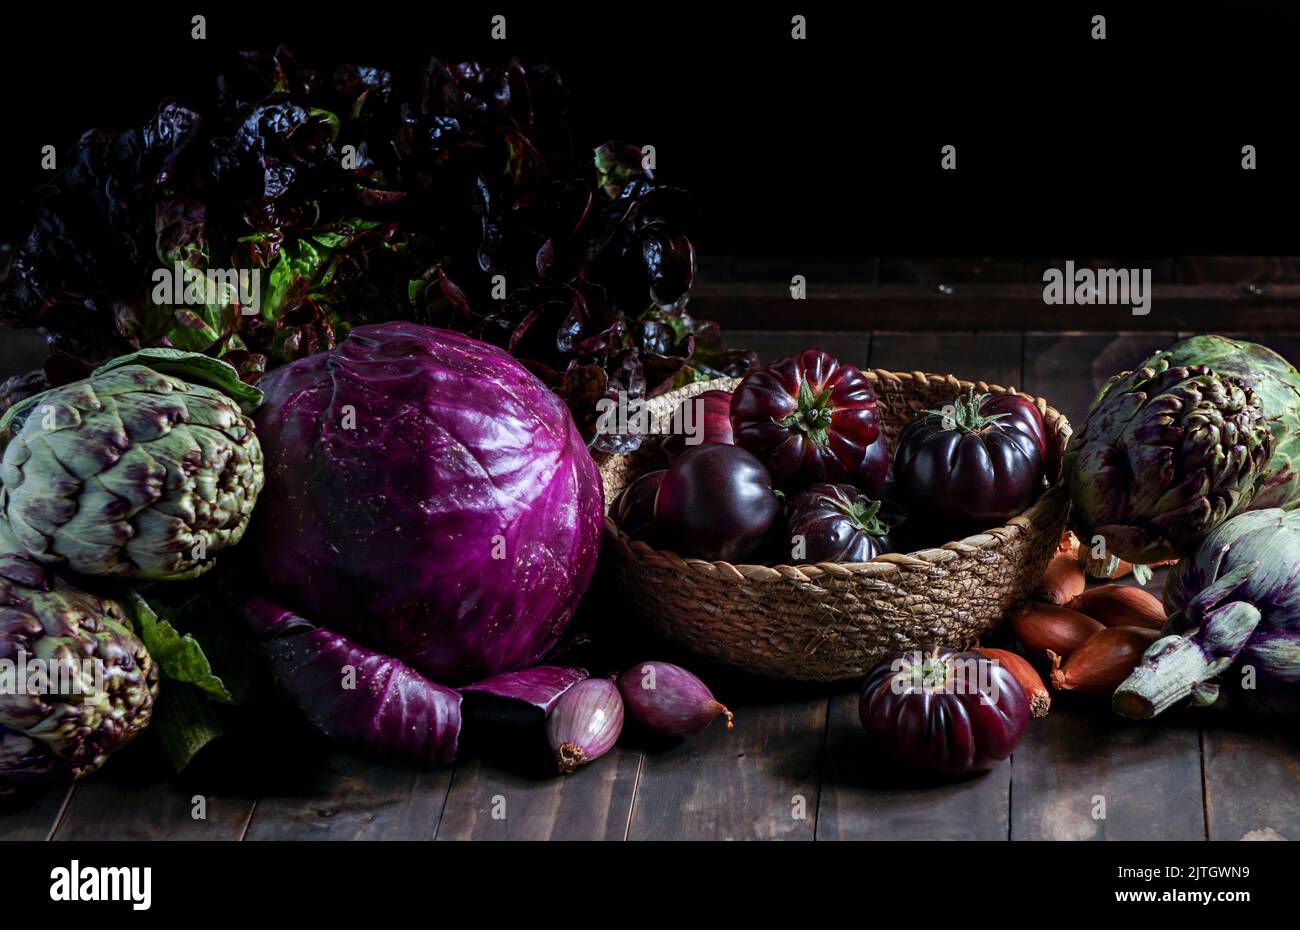 violet vegetables on the wooden background, purple artichoke, tomatoes, oniones, salad Stock Photo